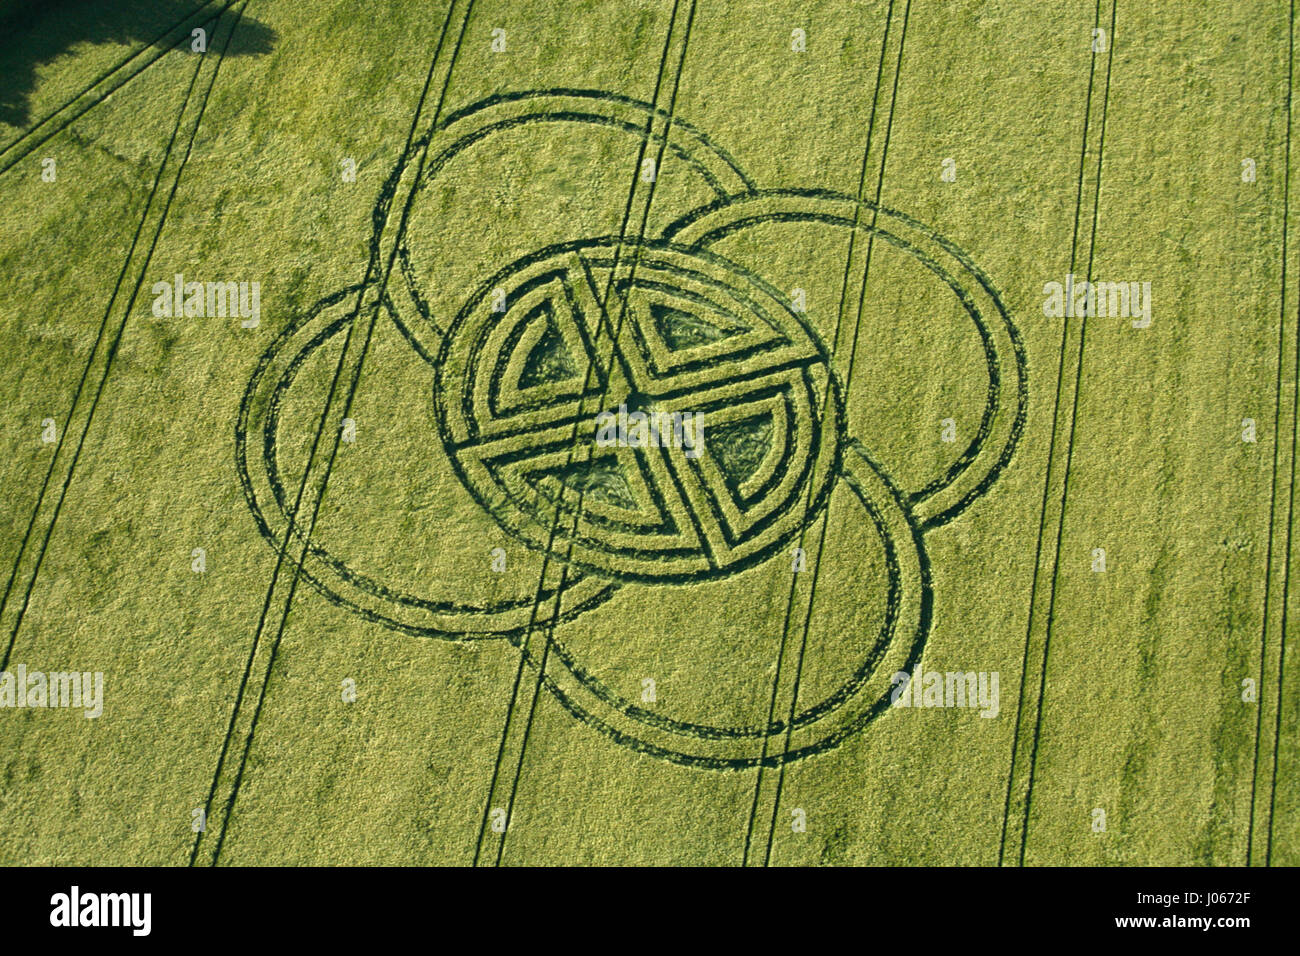 Fox Ground Down, Dorset, UK: A CROP CIRCLE researcher claims the mysterious phenomenon is a temporary relief for Parkinson’s disease sufferers. In a story similar to the Oscar-winning 1985 fantasy film Cocoon, where the elderly have the signs of old age reversed by beings from another world, some British researchers now claim crop circles could have a similar effect in reality. Twenty-five years of study by scientific researcher Lucy Pringle, from Hampshire has revealed the beneficial effects of being inside a crop circle for sufferers of Parkinson’s disease. People suffering from the disease  Stock Photo